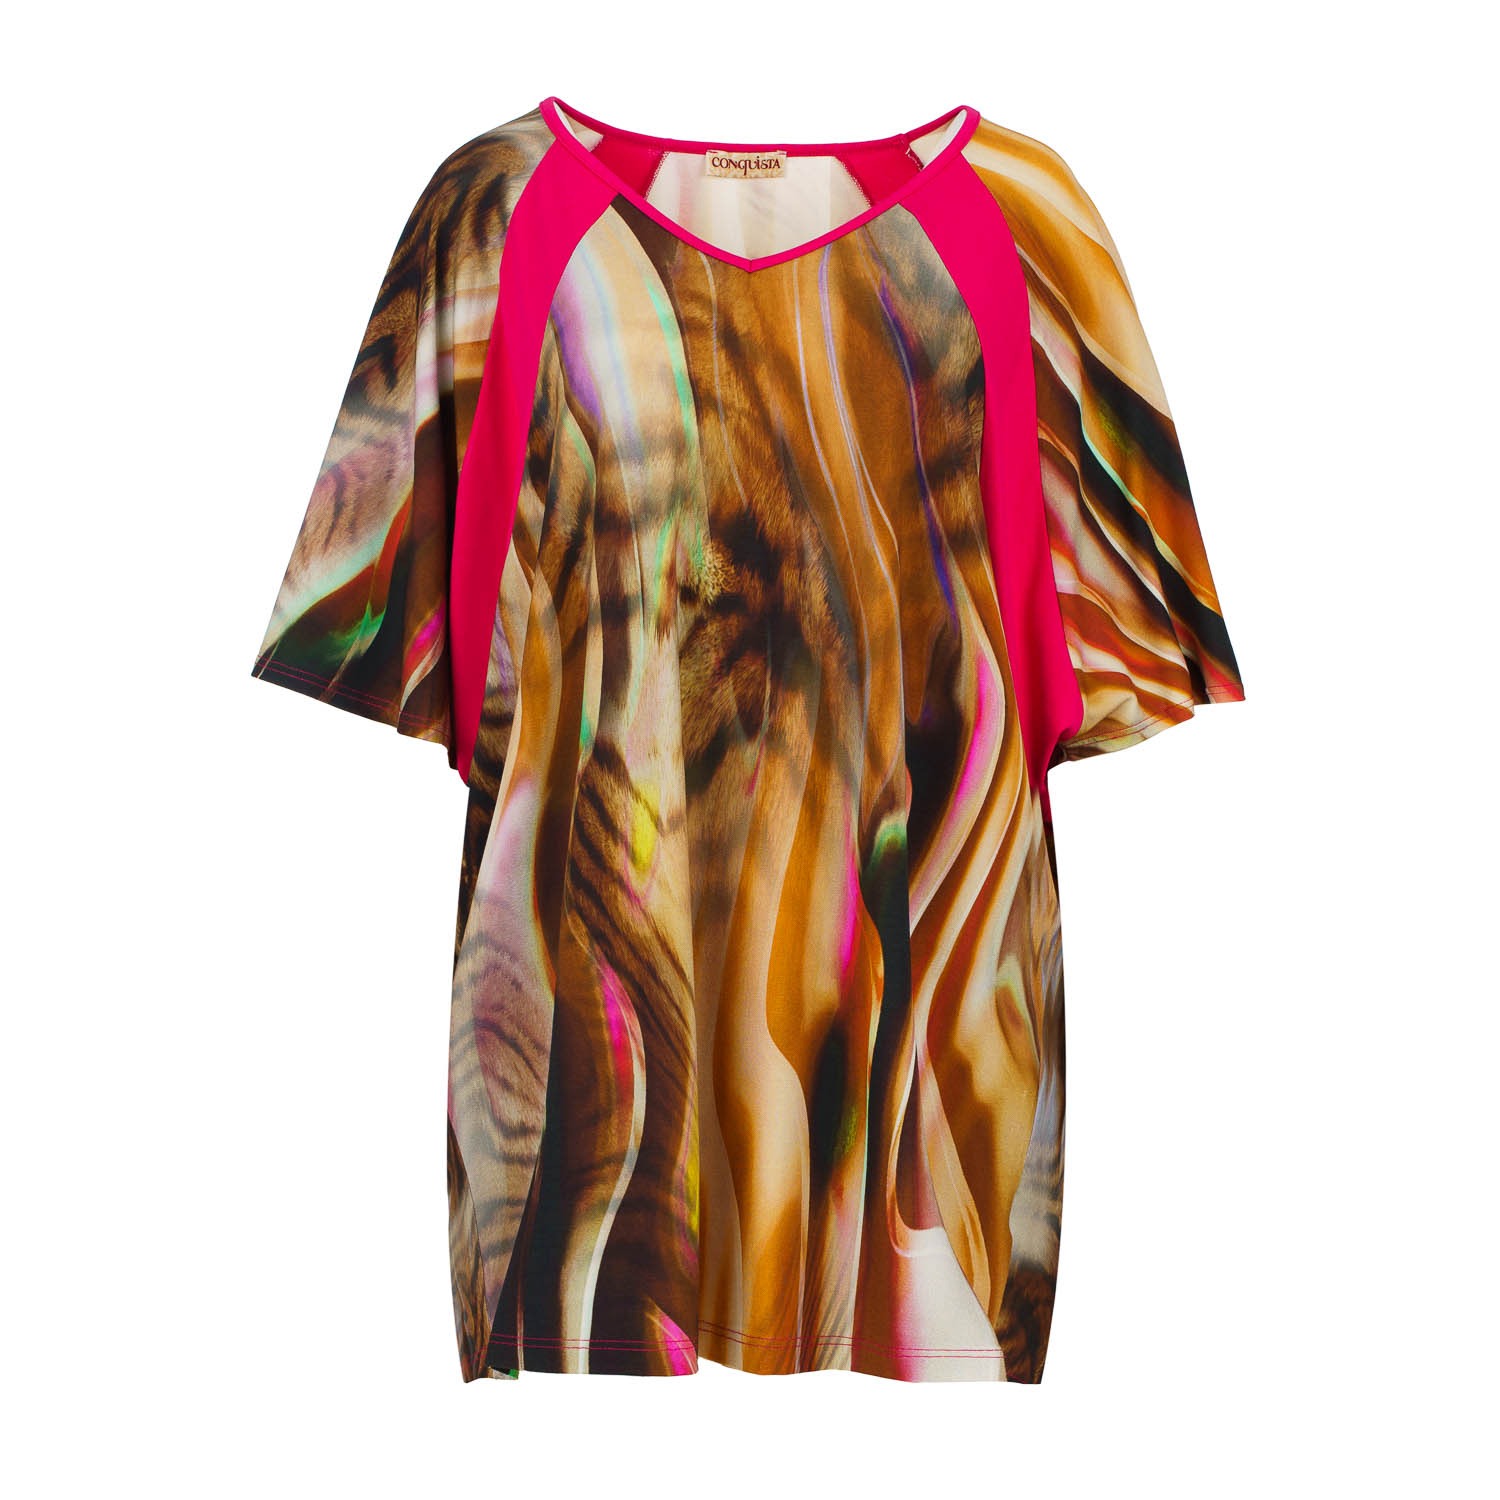 Women’s Print Stretch Jersey Top With Batwing Sleeves Plus Size Large Conquista